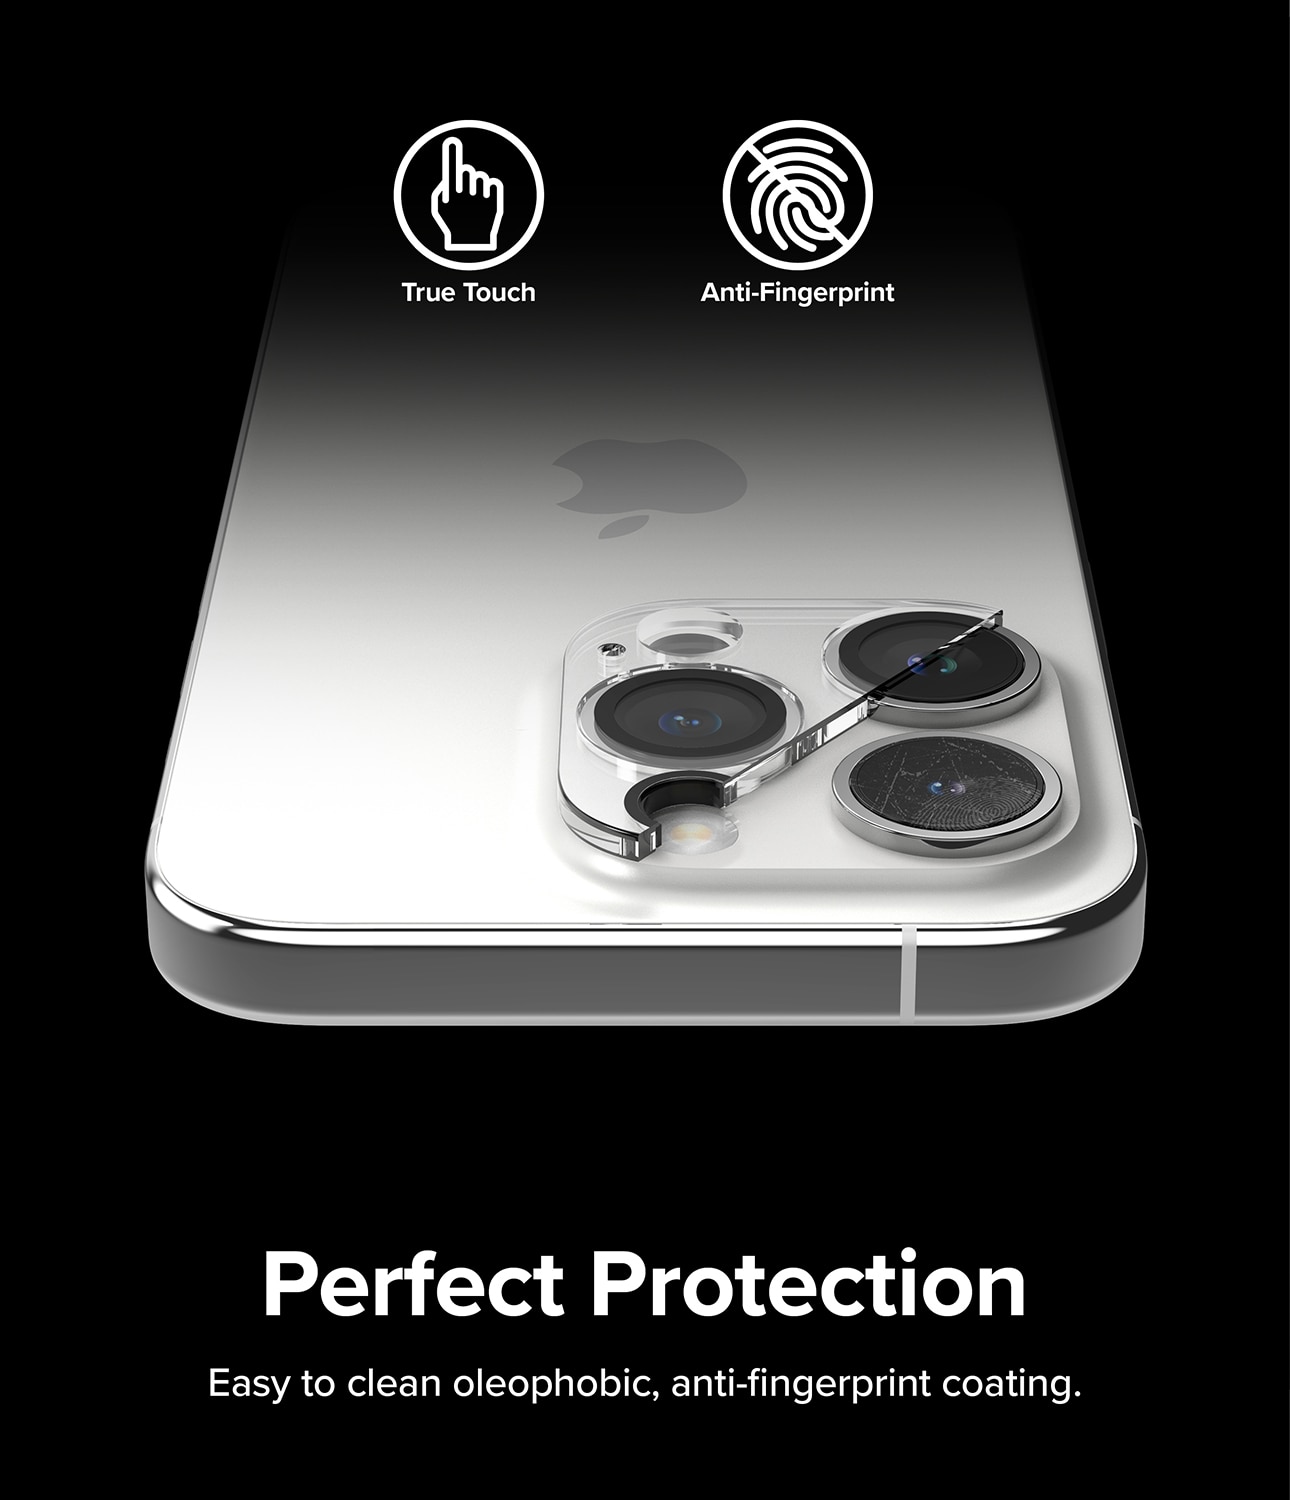 Camera Protector Glass iPhone 15 Pro Max (2-pack)